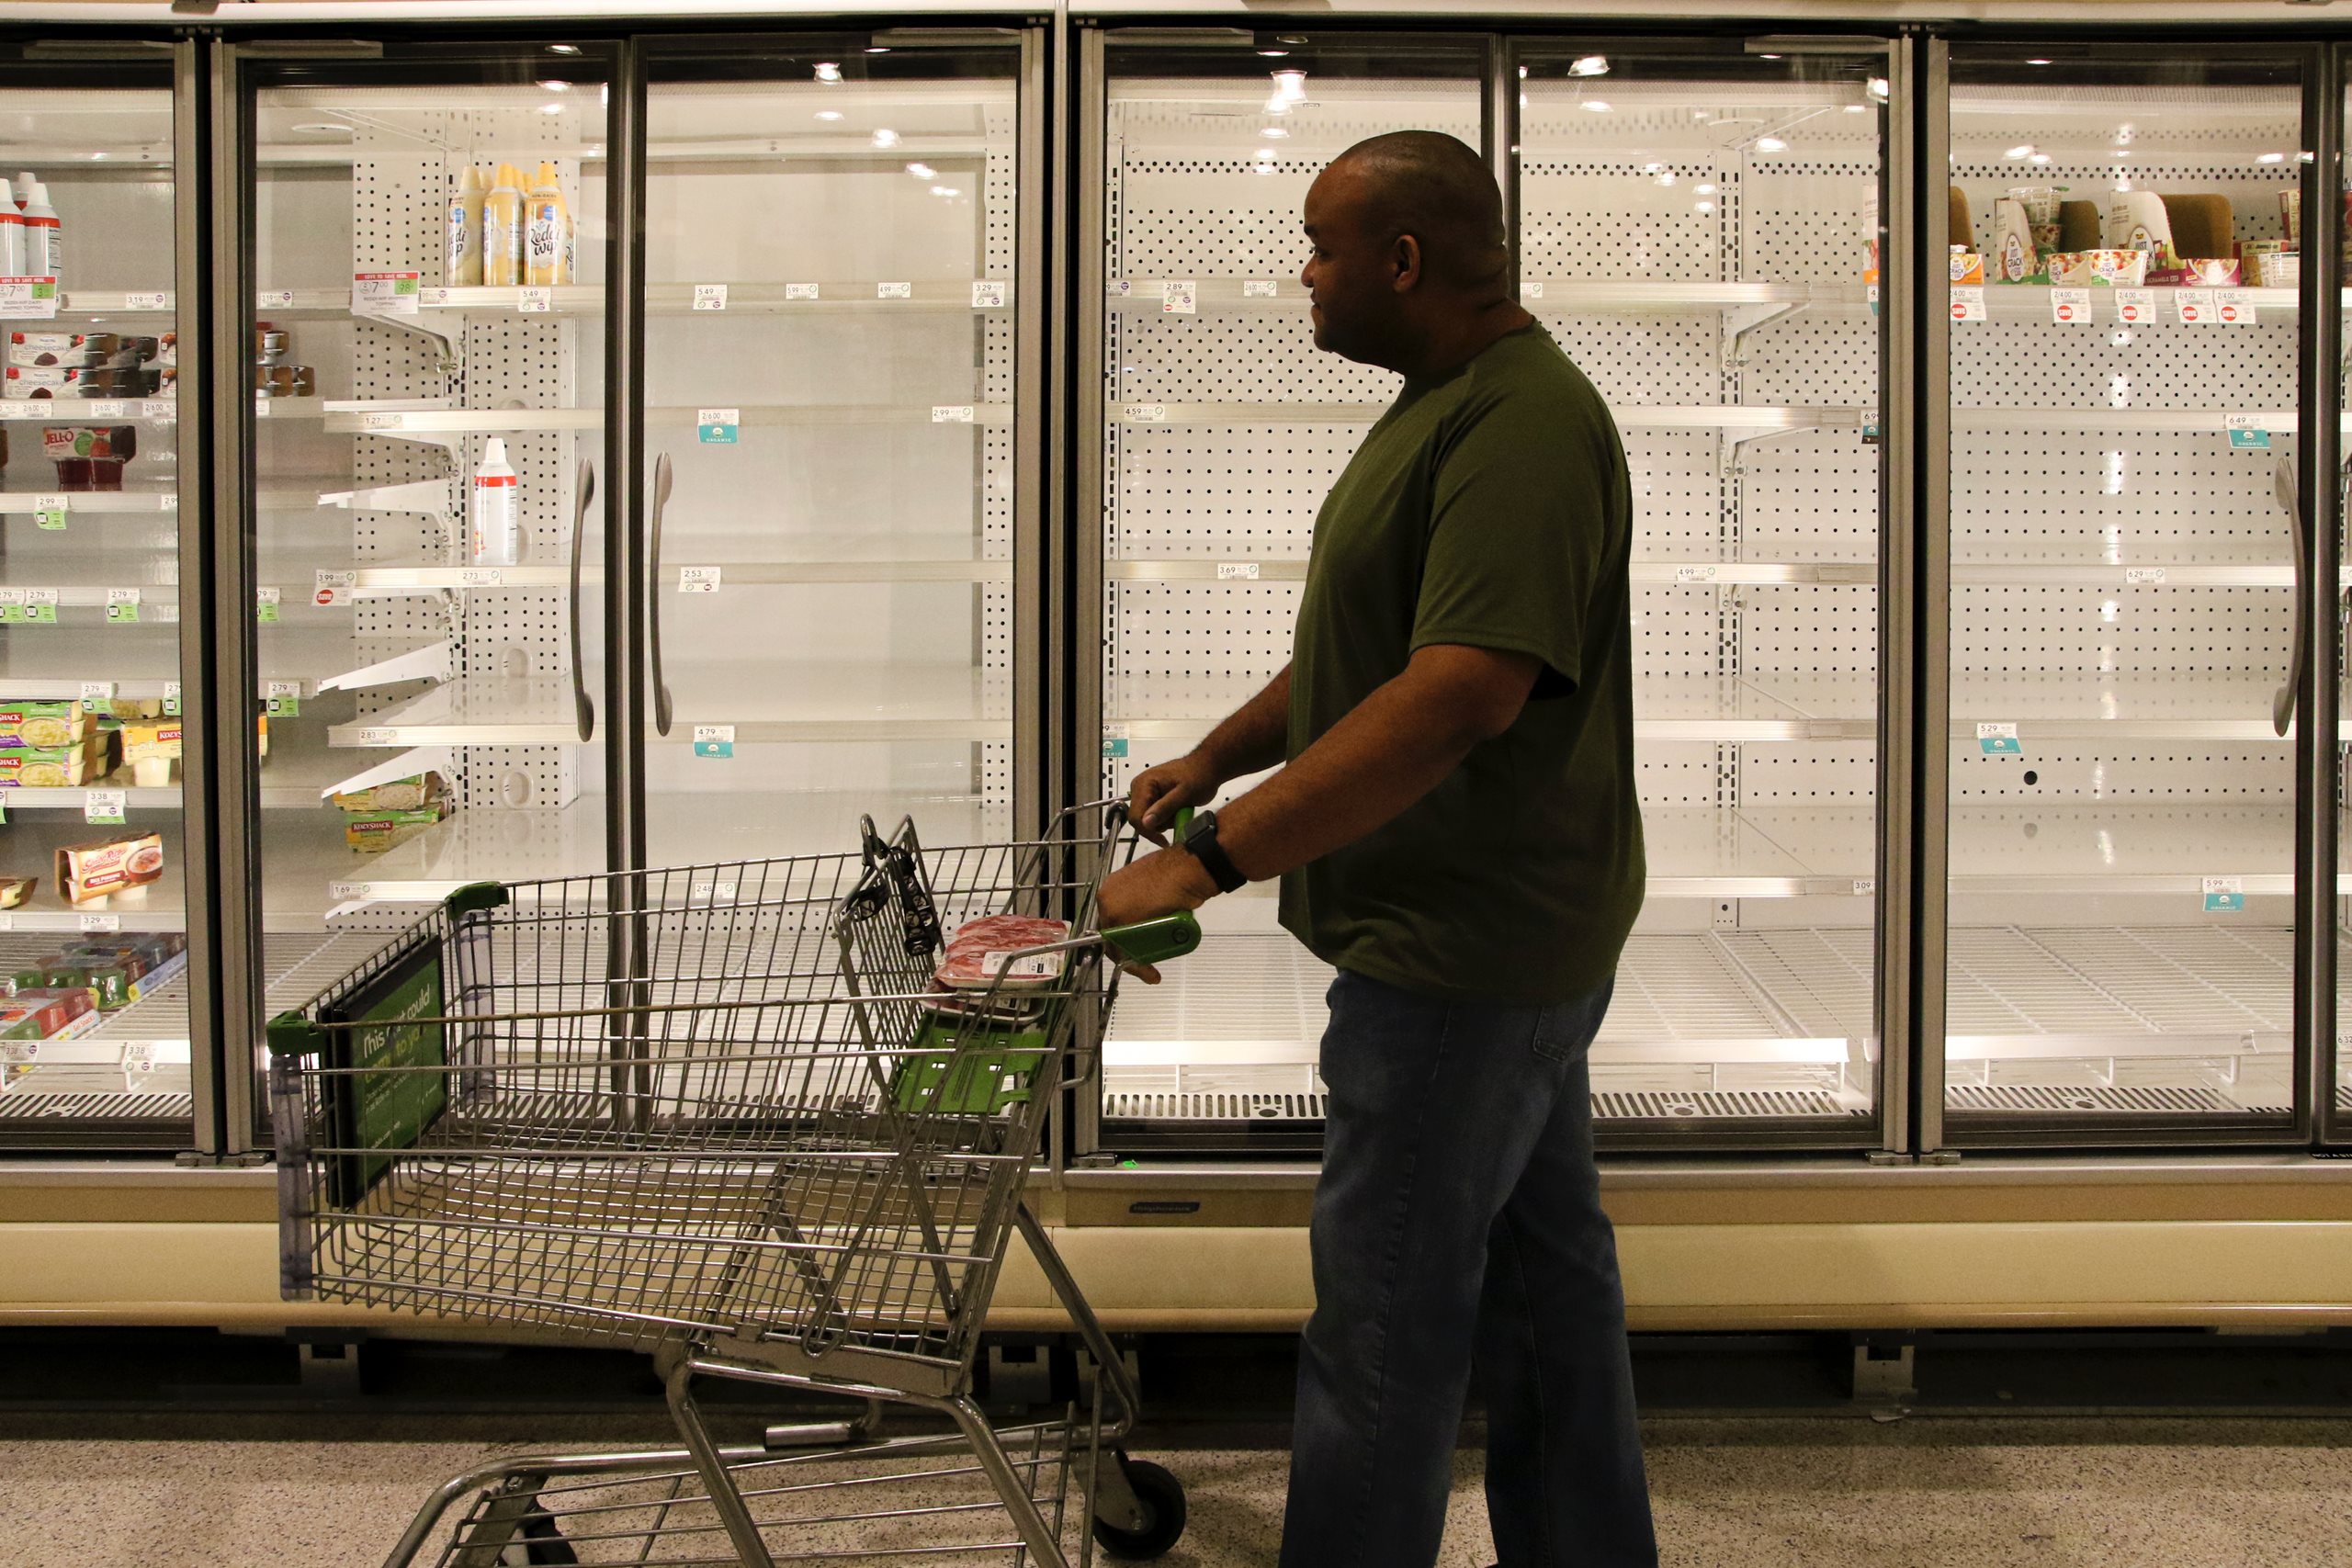 In North America, a man walks with his empty shopping cart past an empty grocery store fridge.